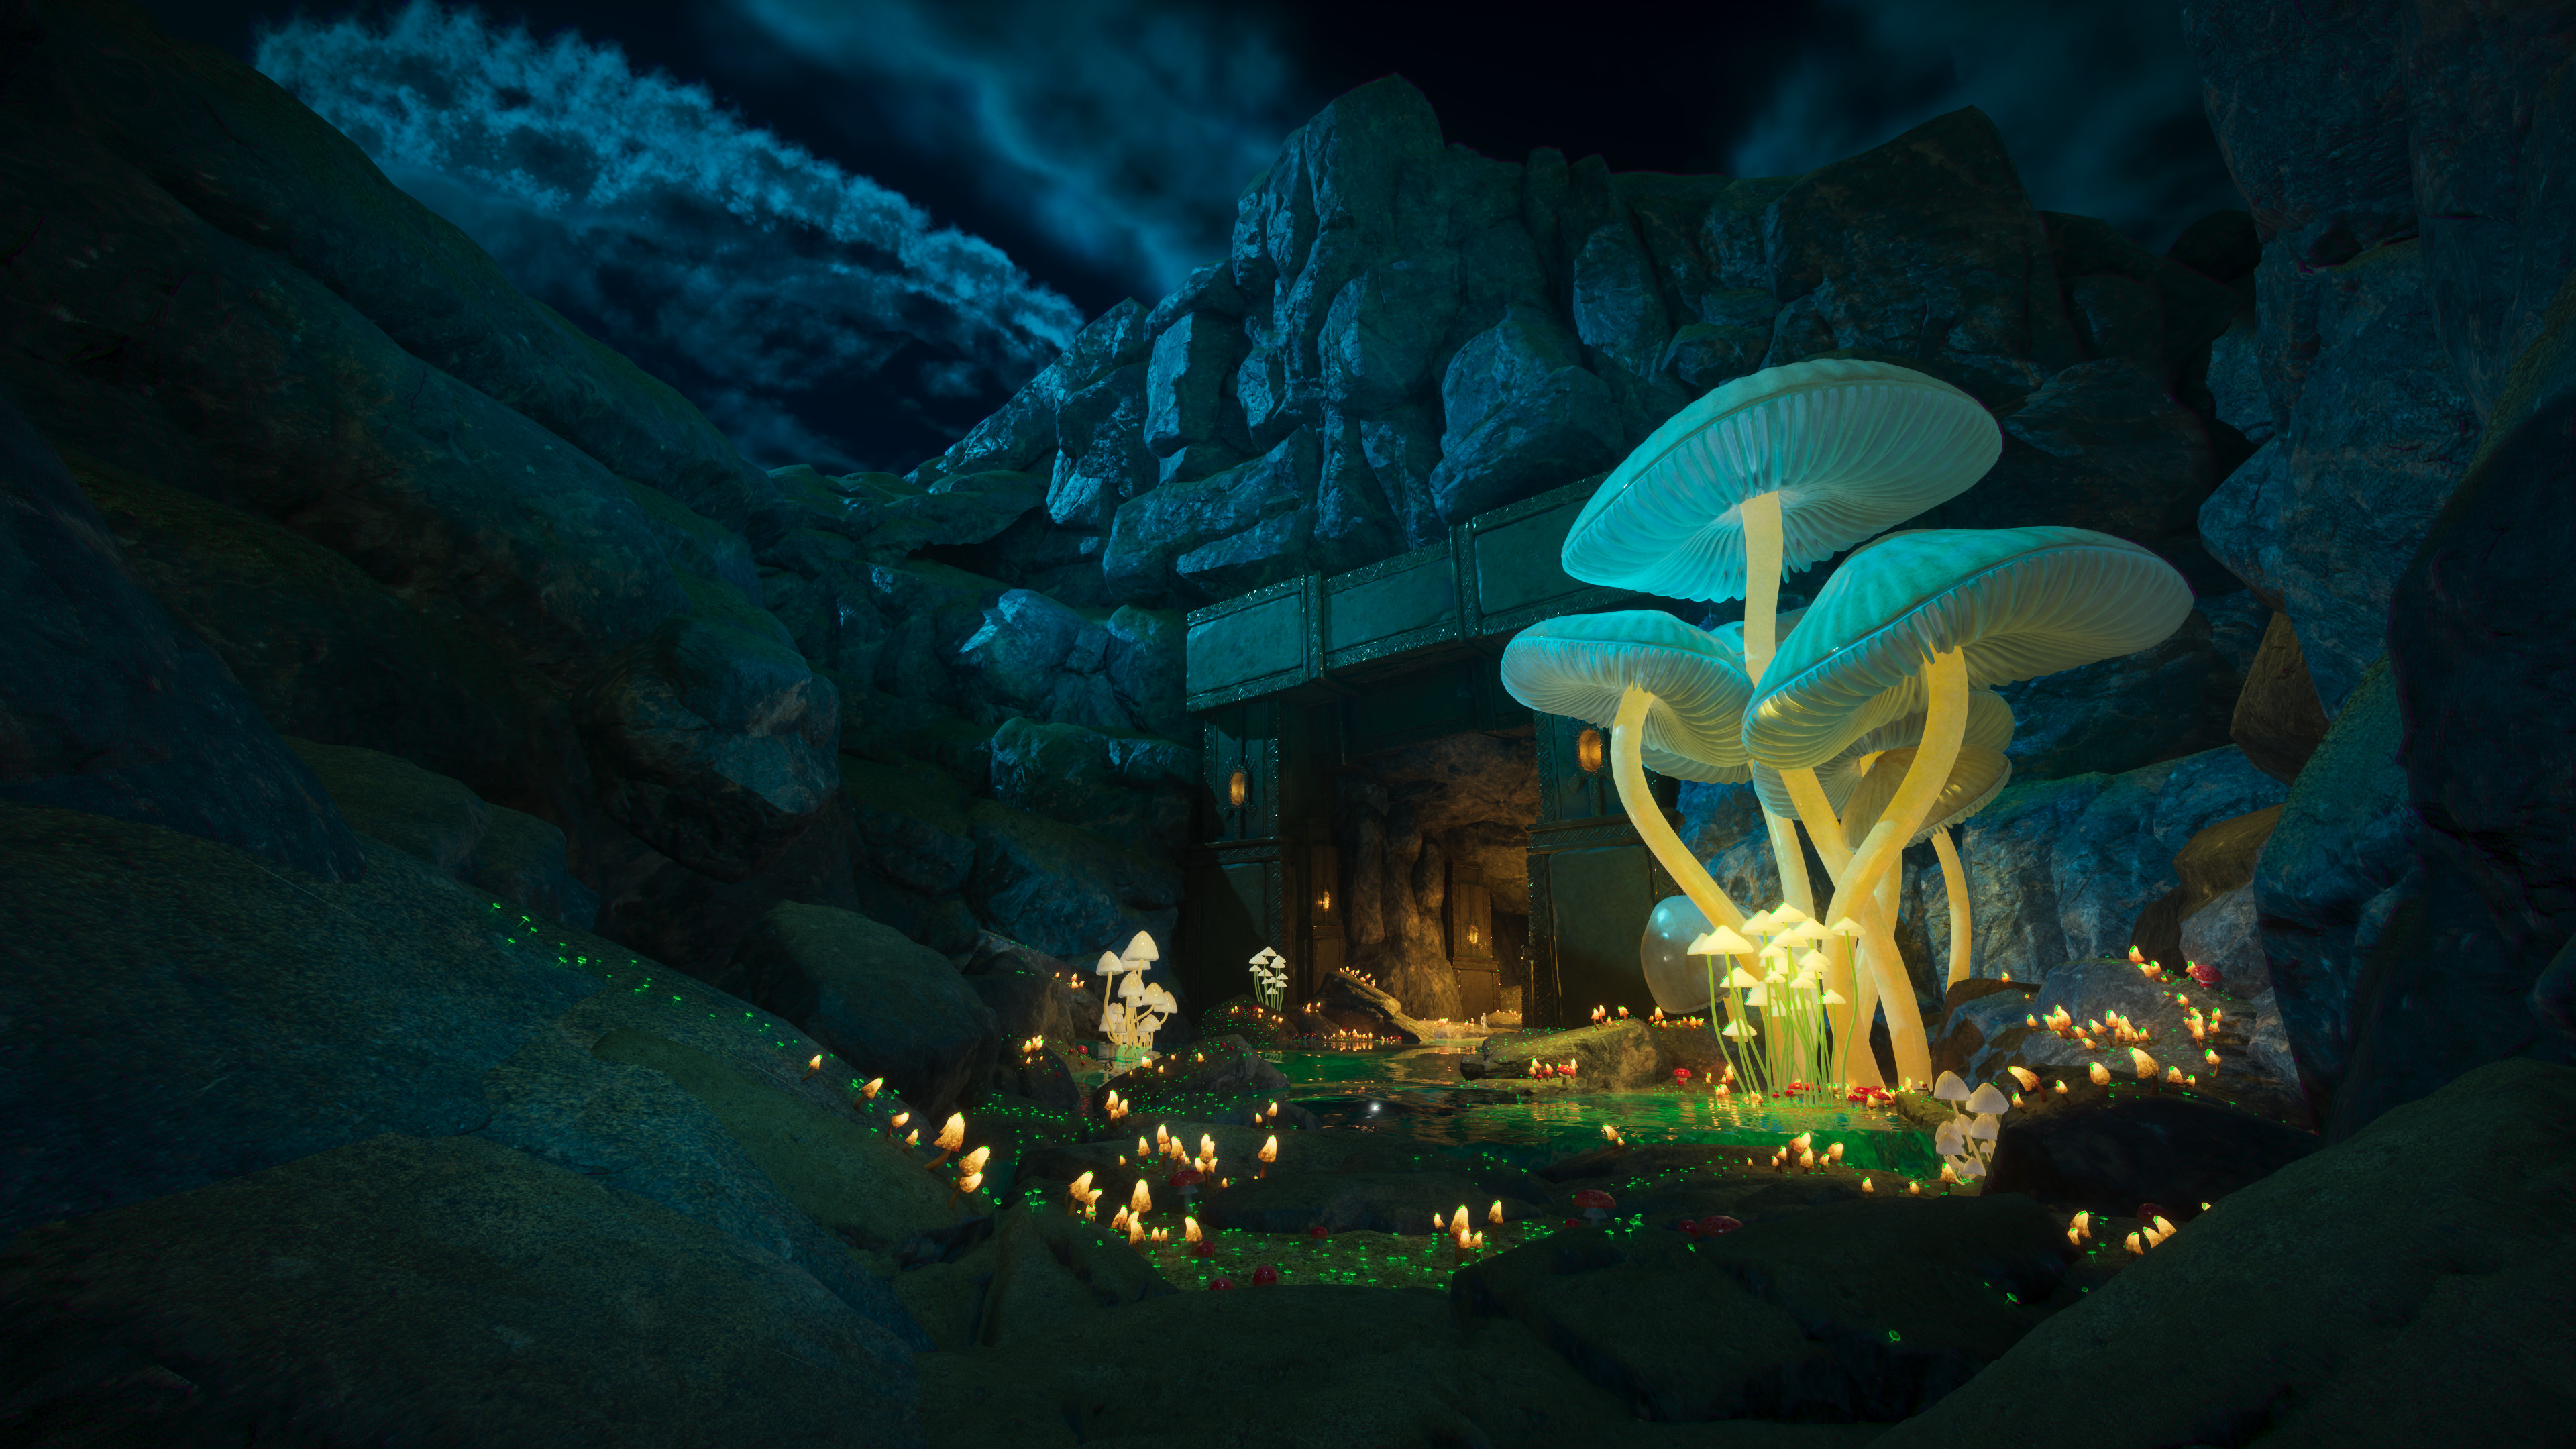 The Idea of mushrooms came into my mind, I think, after I watched Avatar 2. When I saw those beautiful foliage like giant trees, small mushroom-like grass, people, all inspired me to reconsider my project and make a much better scene with impressive light